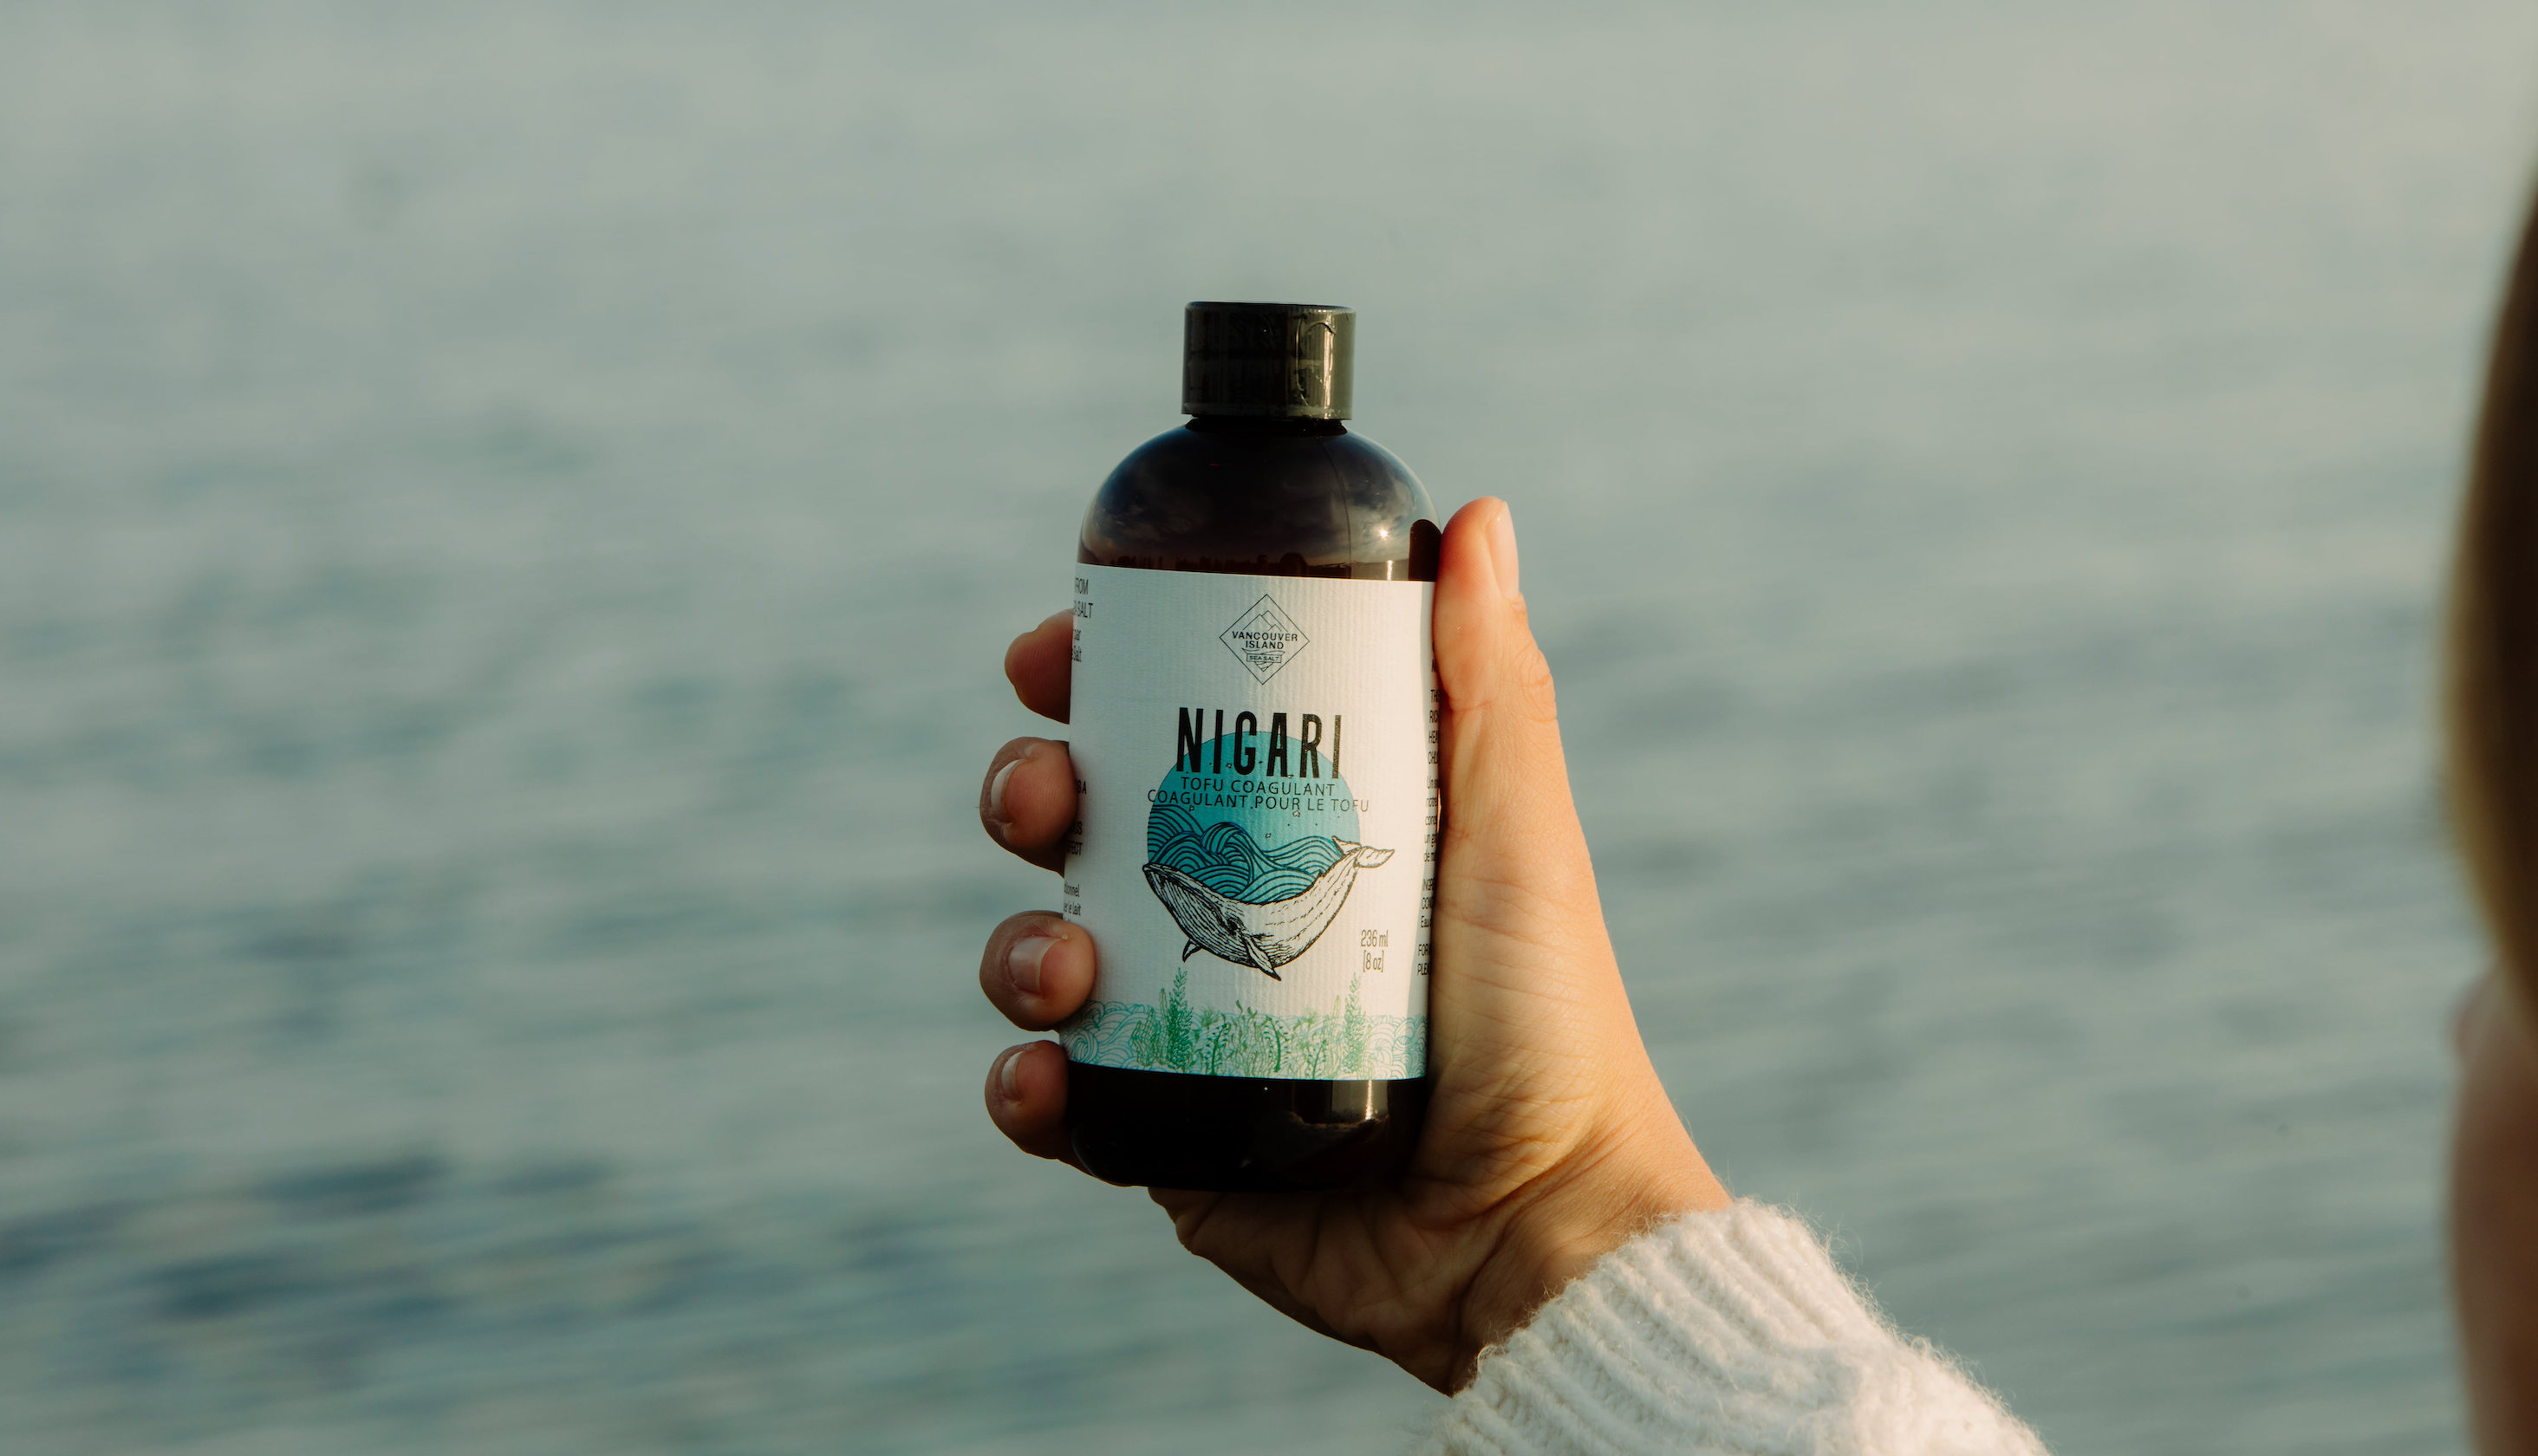 Amp Up Your Fermentation Game with All Natural Nigari